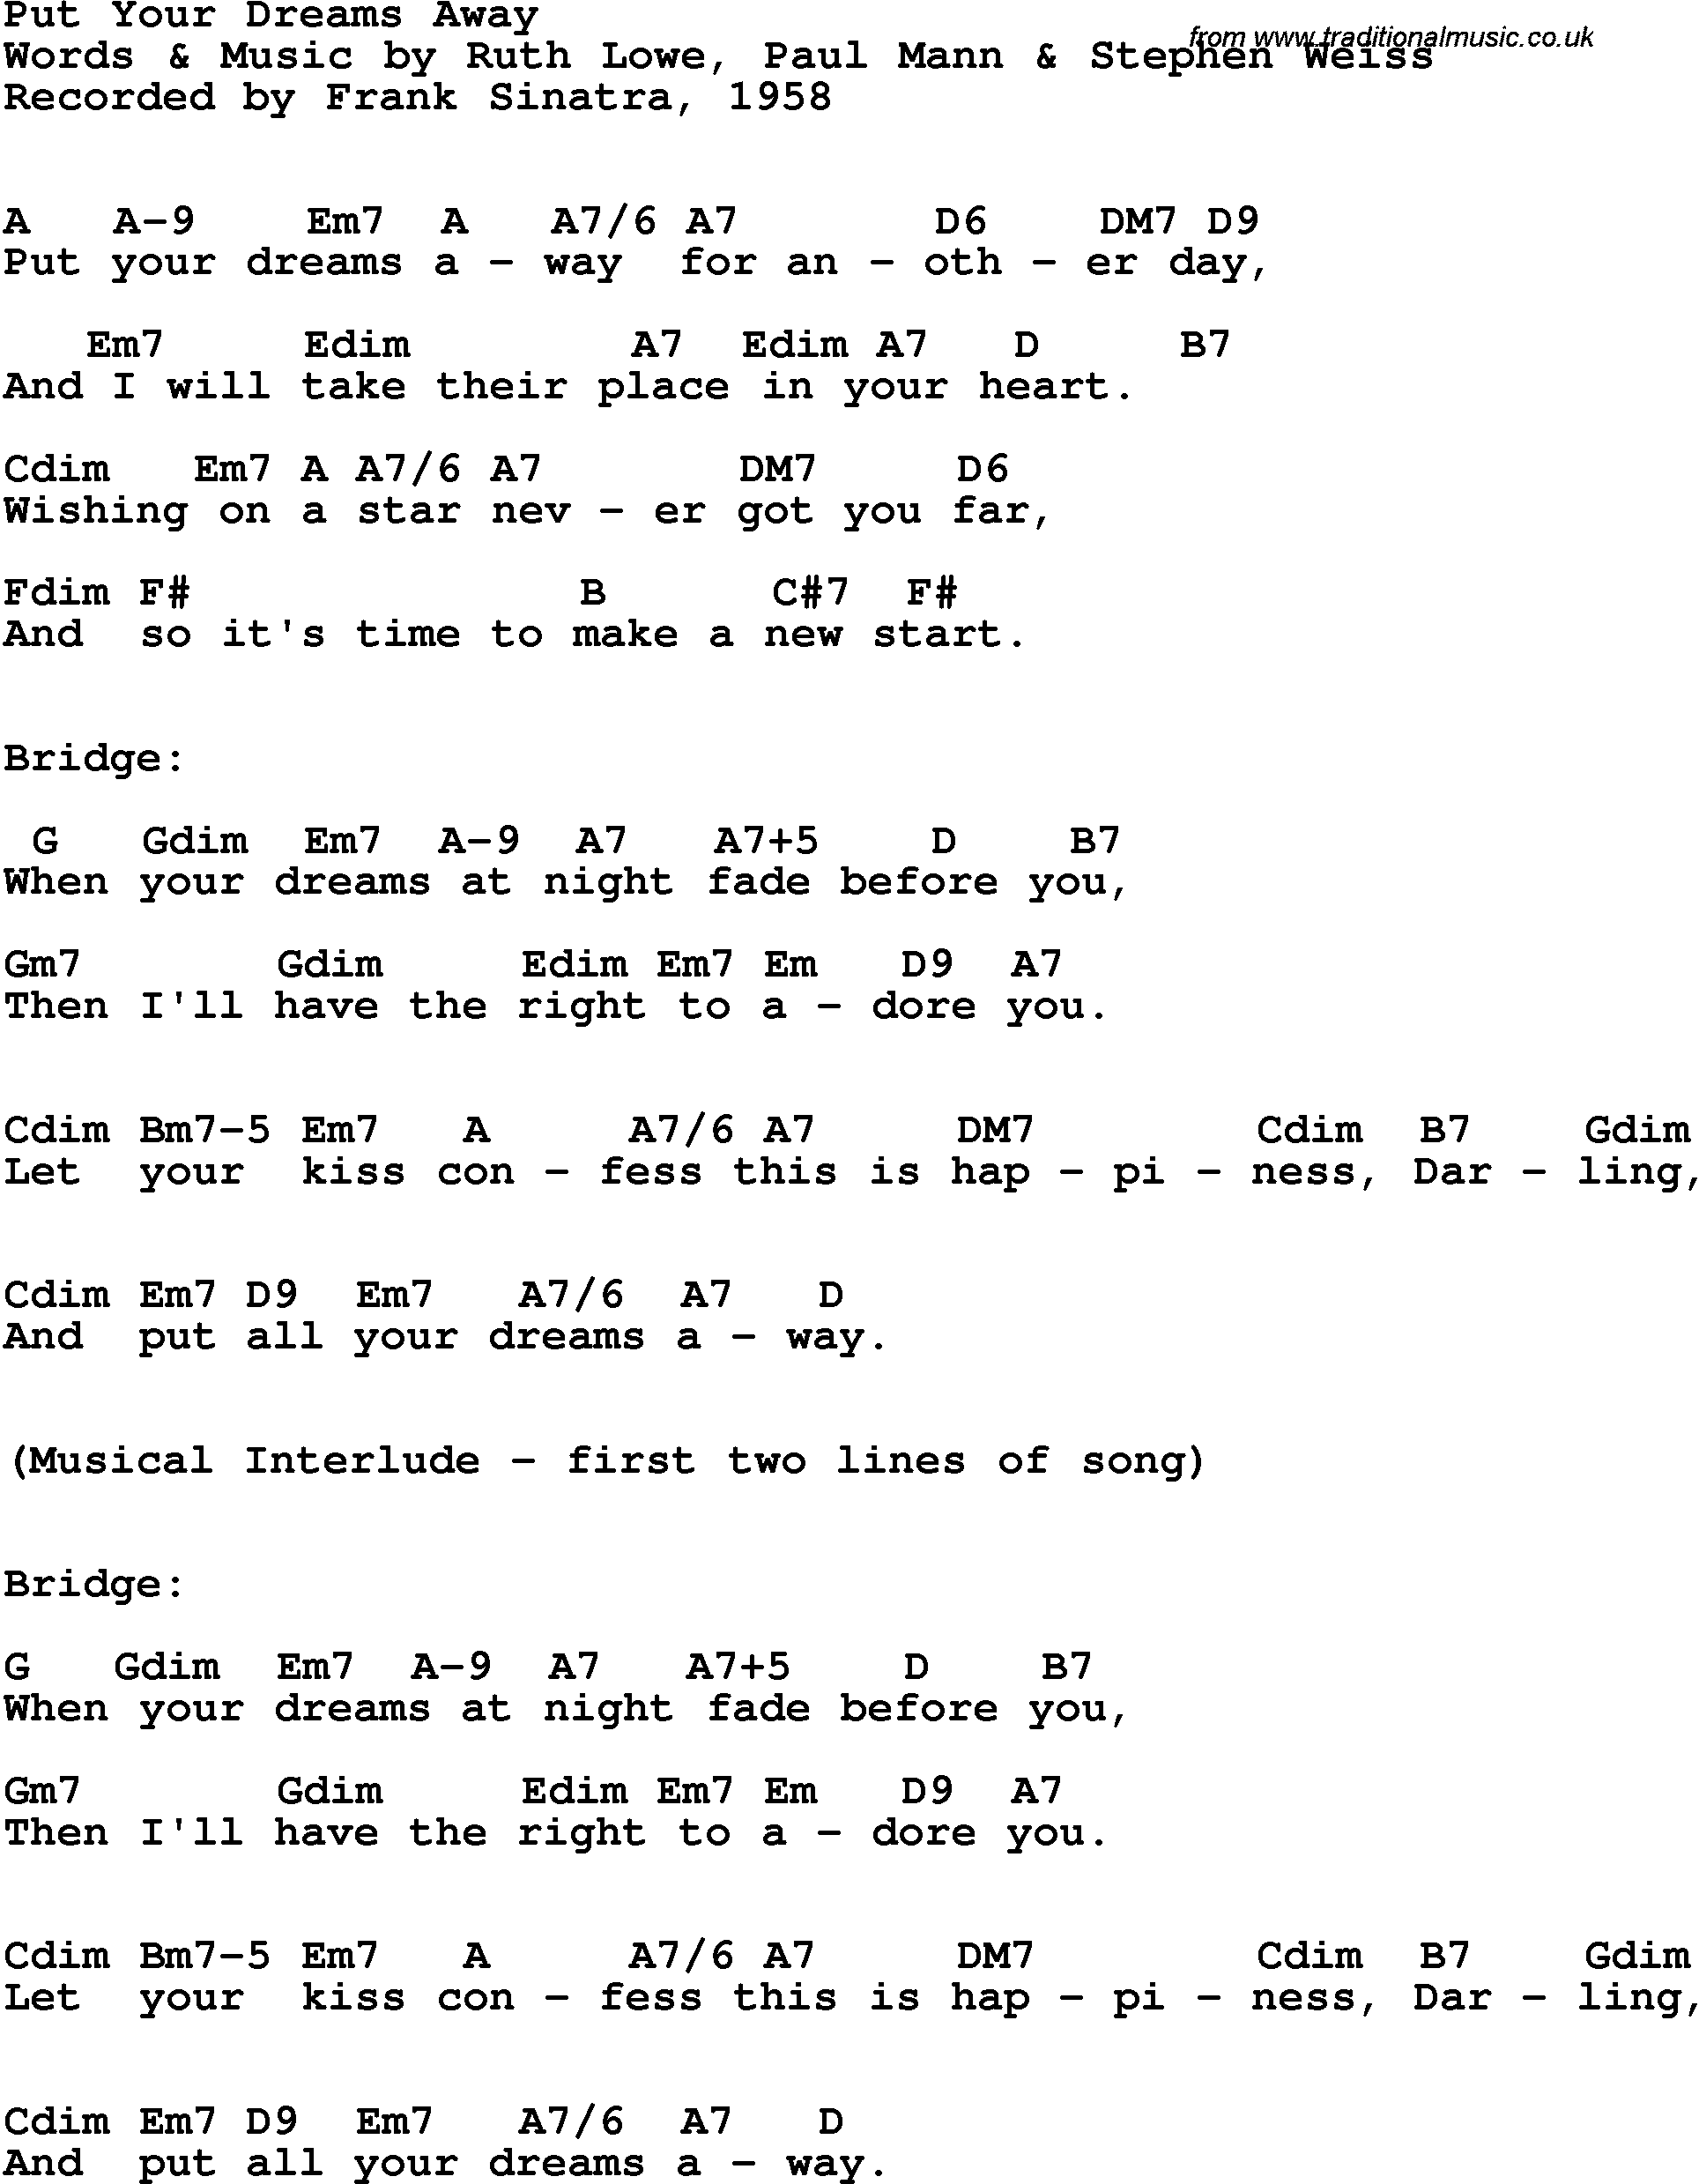 Song Lyrics with guitar chords for Put Your Dreams Away - Frank Sinatra, 1958